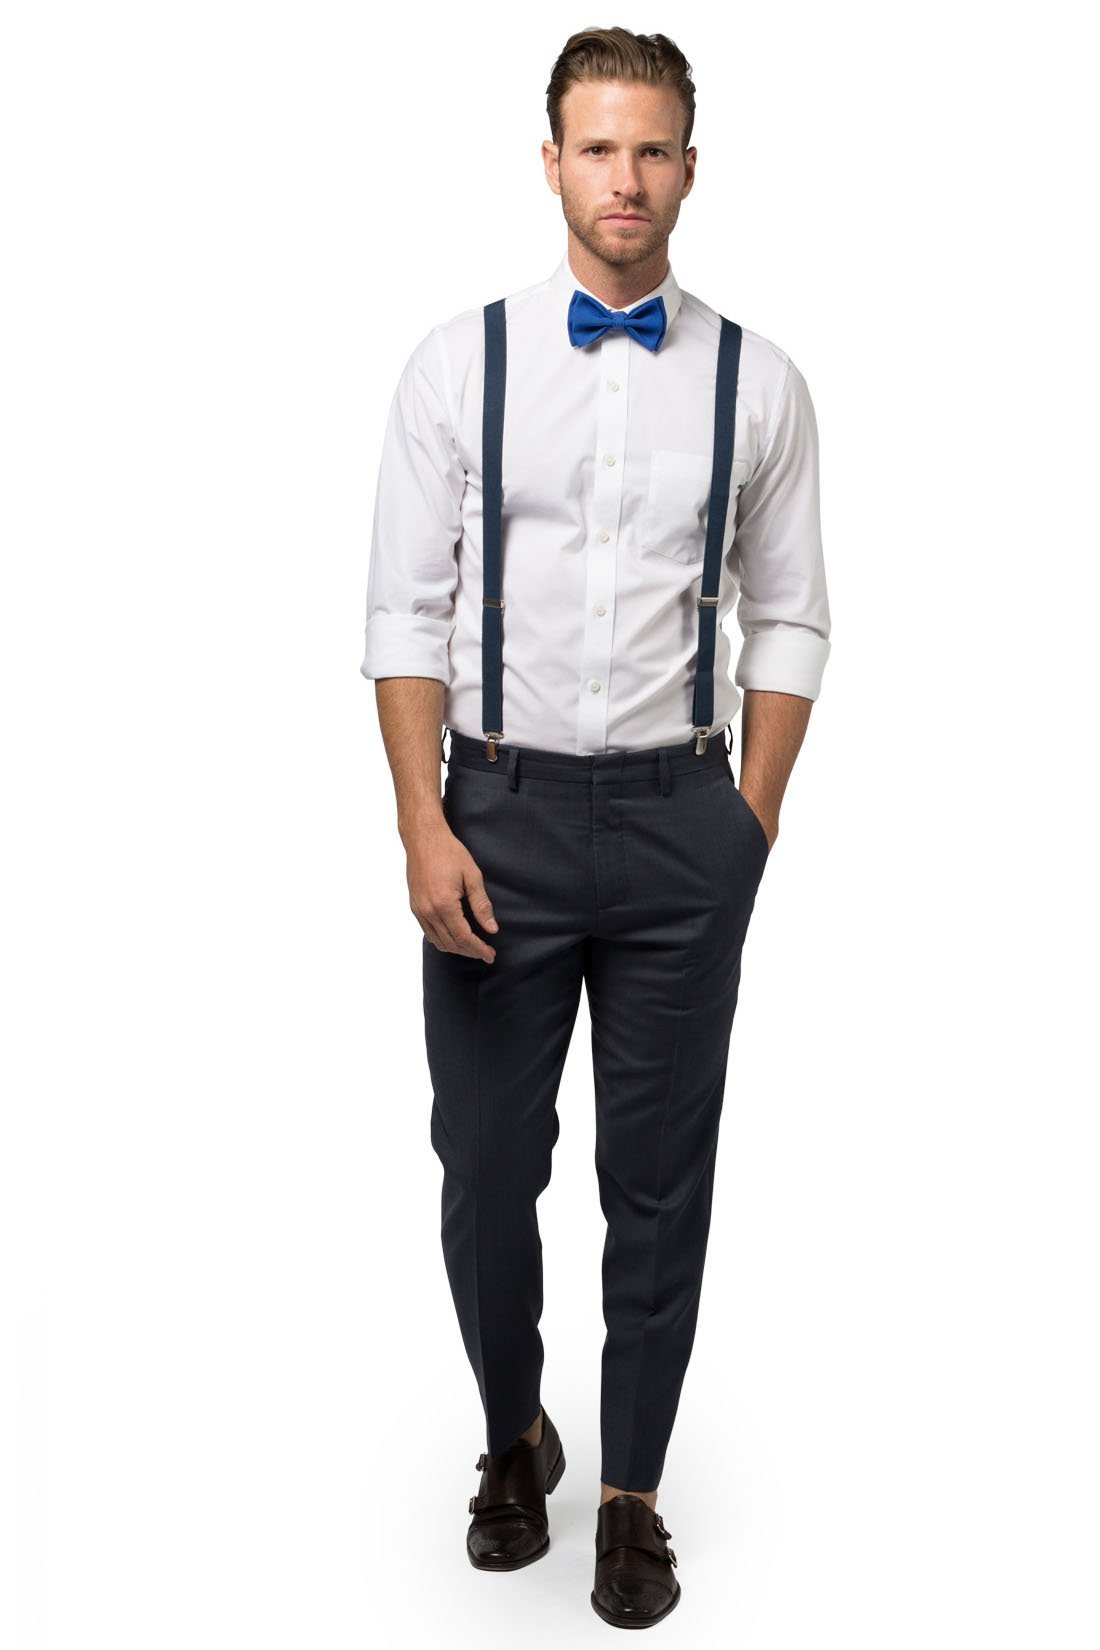 Navy Suspenders & Royal Blue Bow Tie - Baby to Adult Sizes– Armoniia